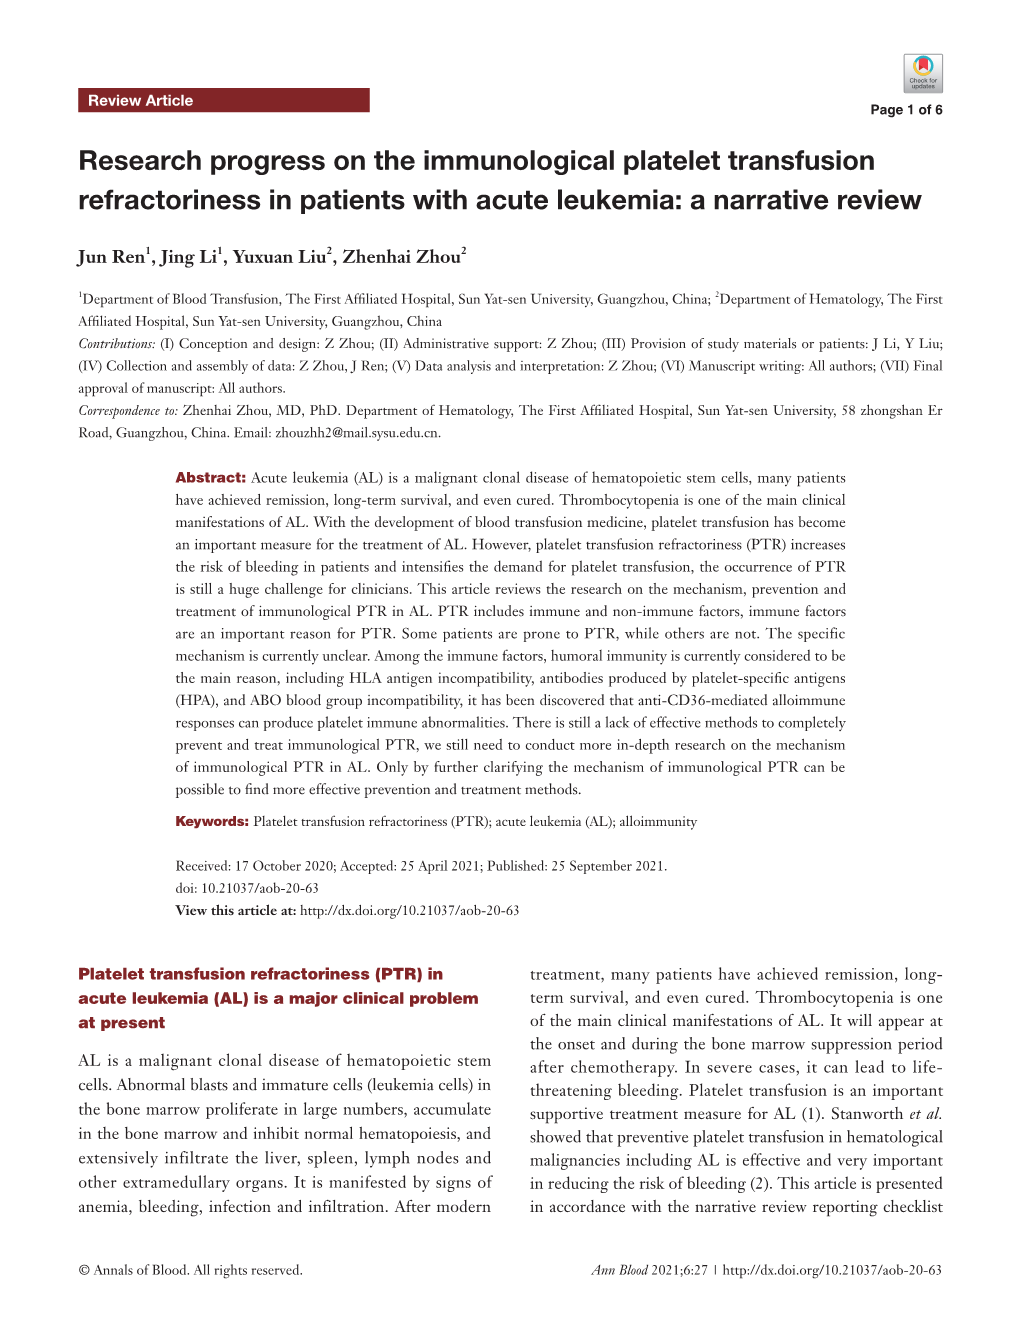 Research Progress on the Immunological Platelet Transfusion Refractoriness in Patients with Acute Leukemia: a Narrative Review